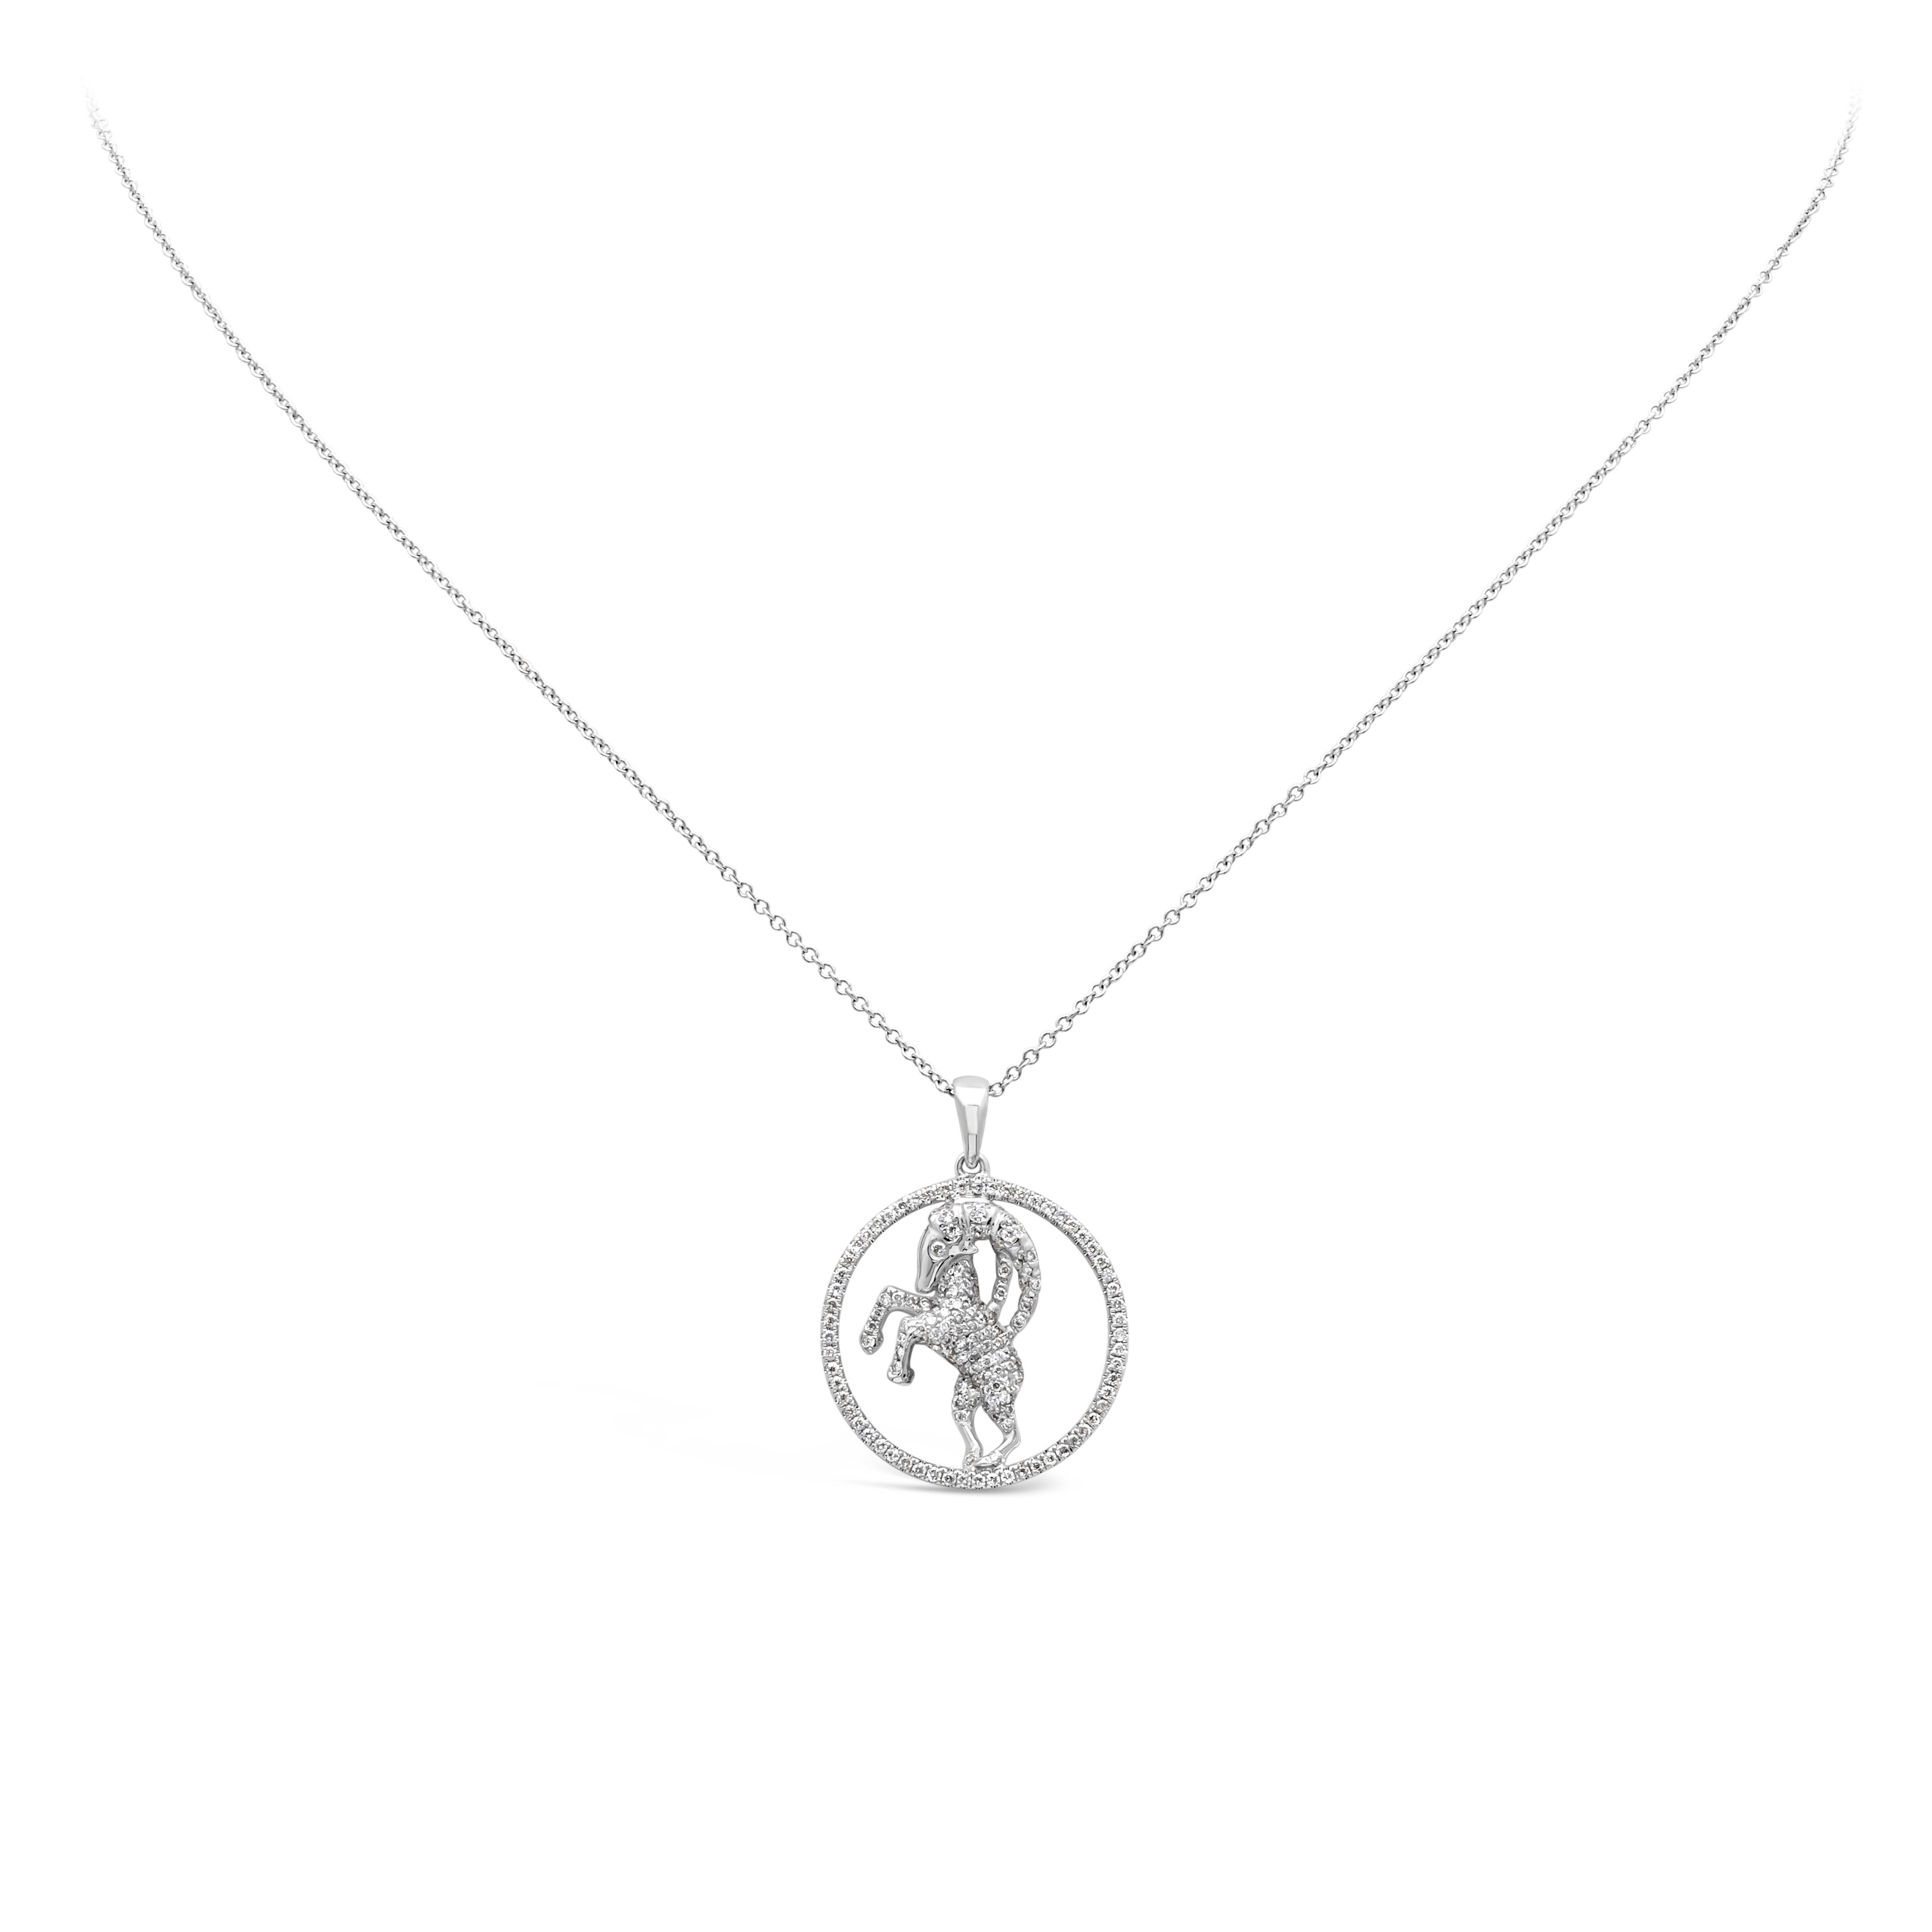 Astrological Zodiac Sign, Stylish open work ram design pendant necklace. The ram is made with 18K white gold clustered with brilliant round diamonds. Circular open work clustered with brilliant round diamonds surrounds the center piece. 160 pieces